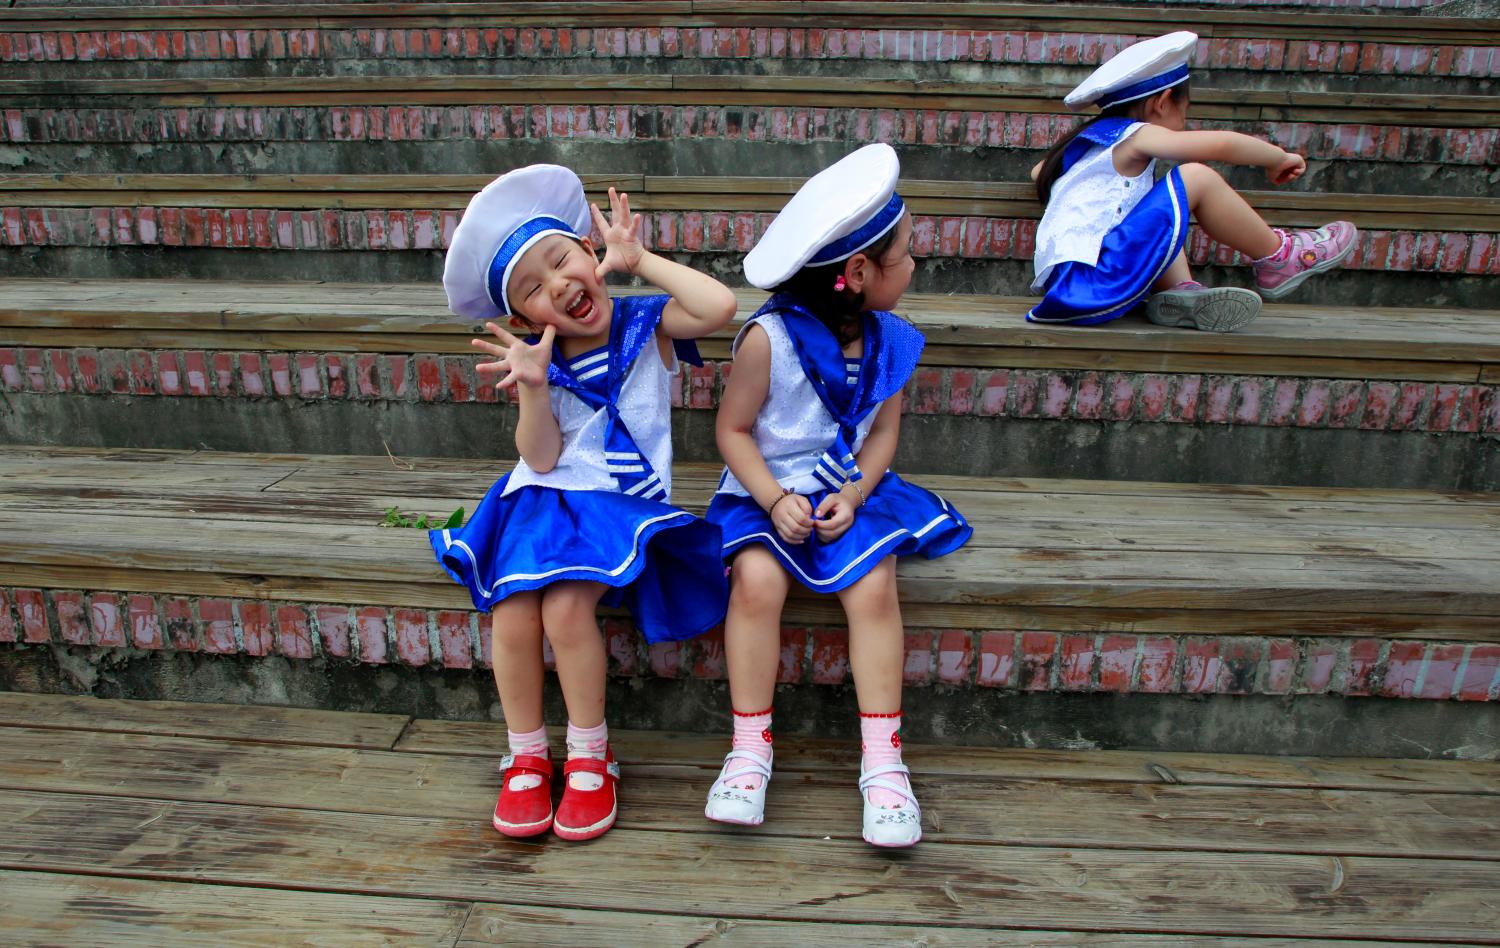 Children dressed in sailor outfits play before a performance during World Oceans Day celebrations in Taipei June 8, 2011. REUTERS/Nicky Loh (TAIWAN - Tags: SOCIETY) - GM1E7681AQU01